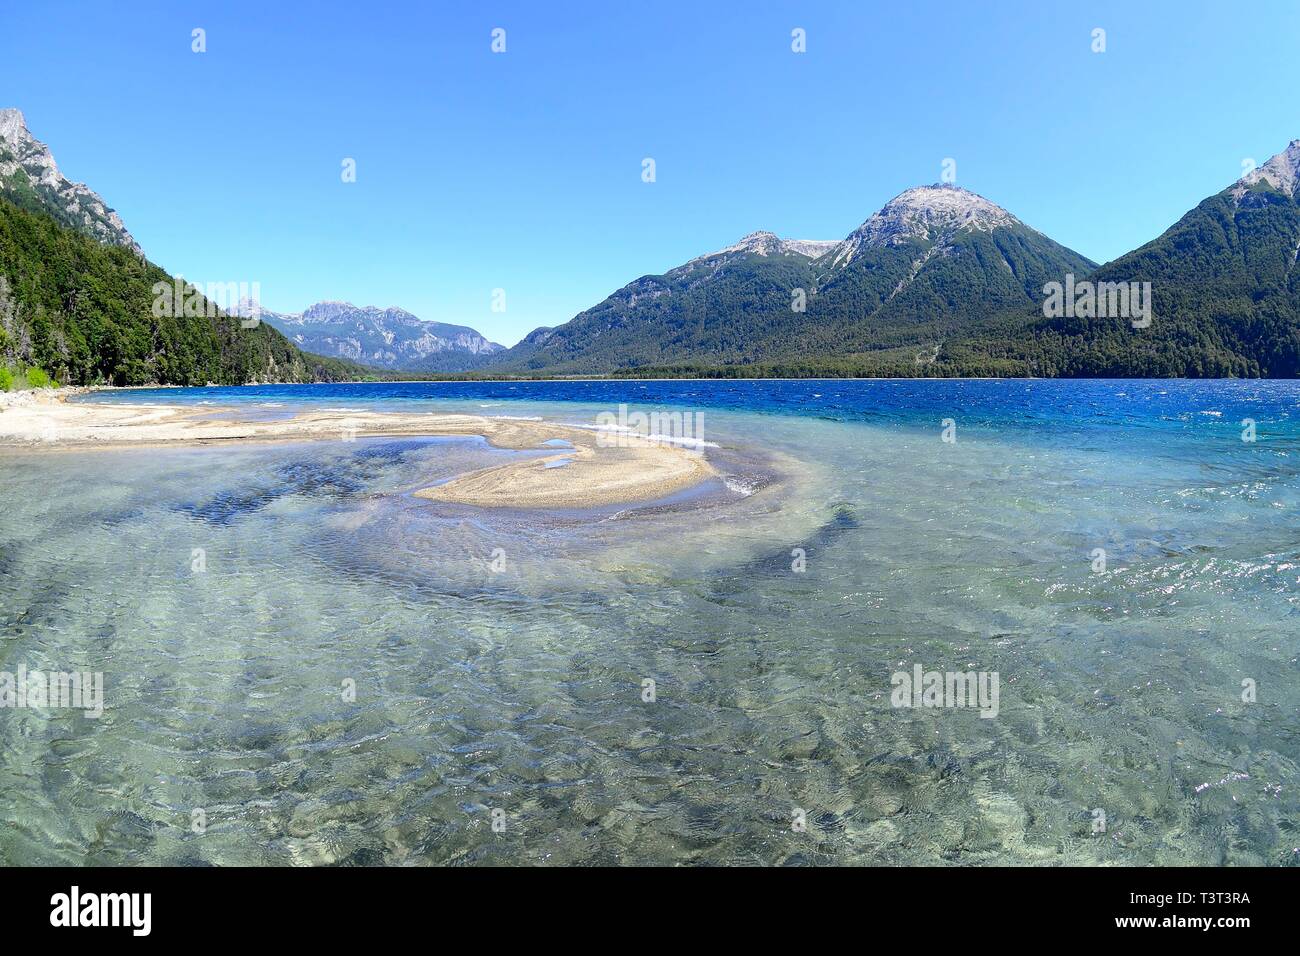 Lake with crystal clear water in front of mountain landscape, Lago Traful, Province Neuquen, Patagonia, Argentina Stock Photo